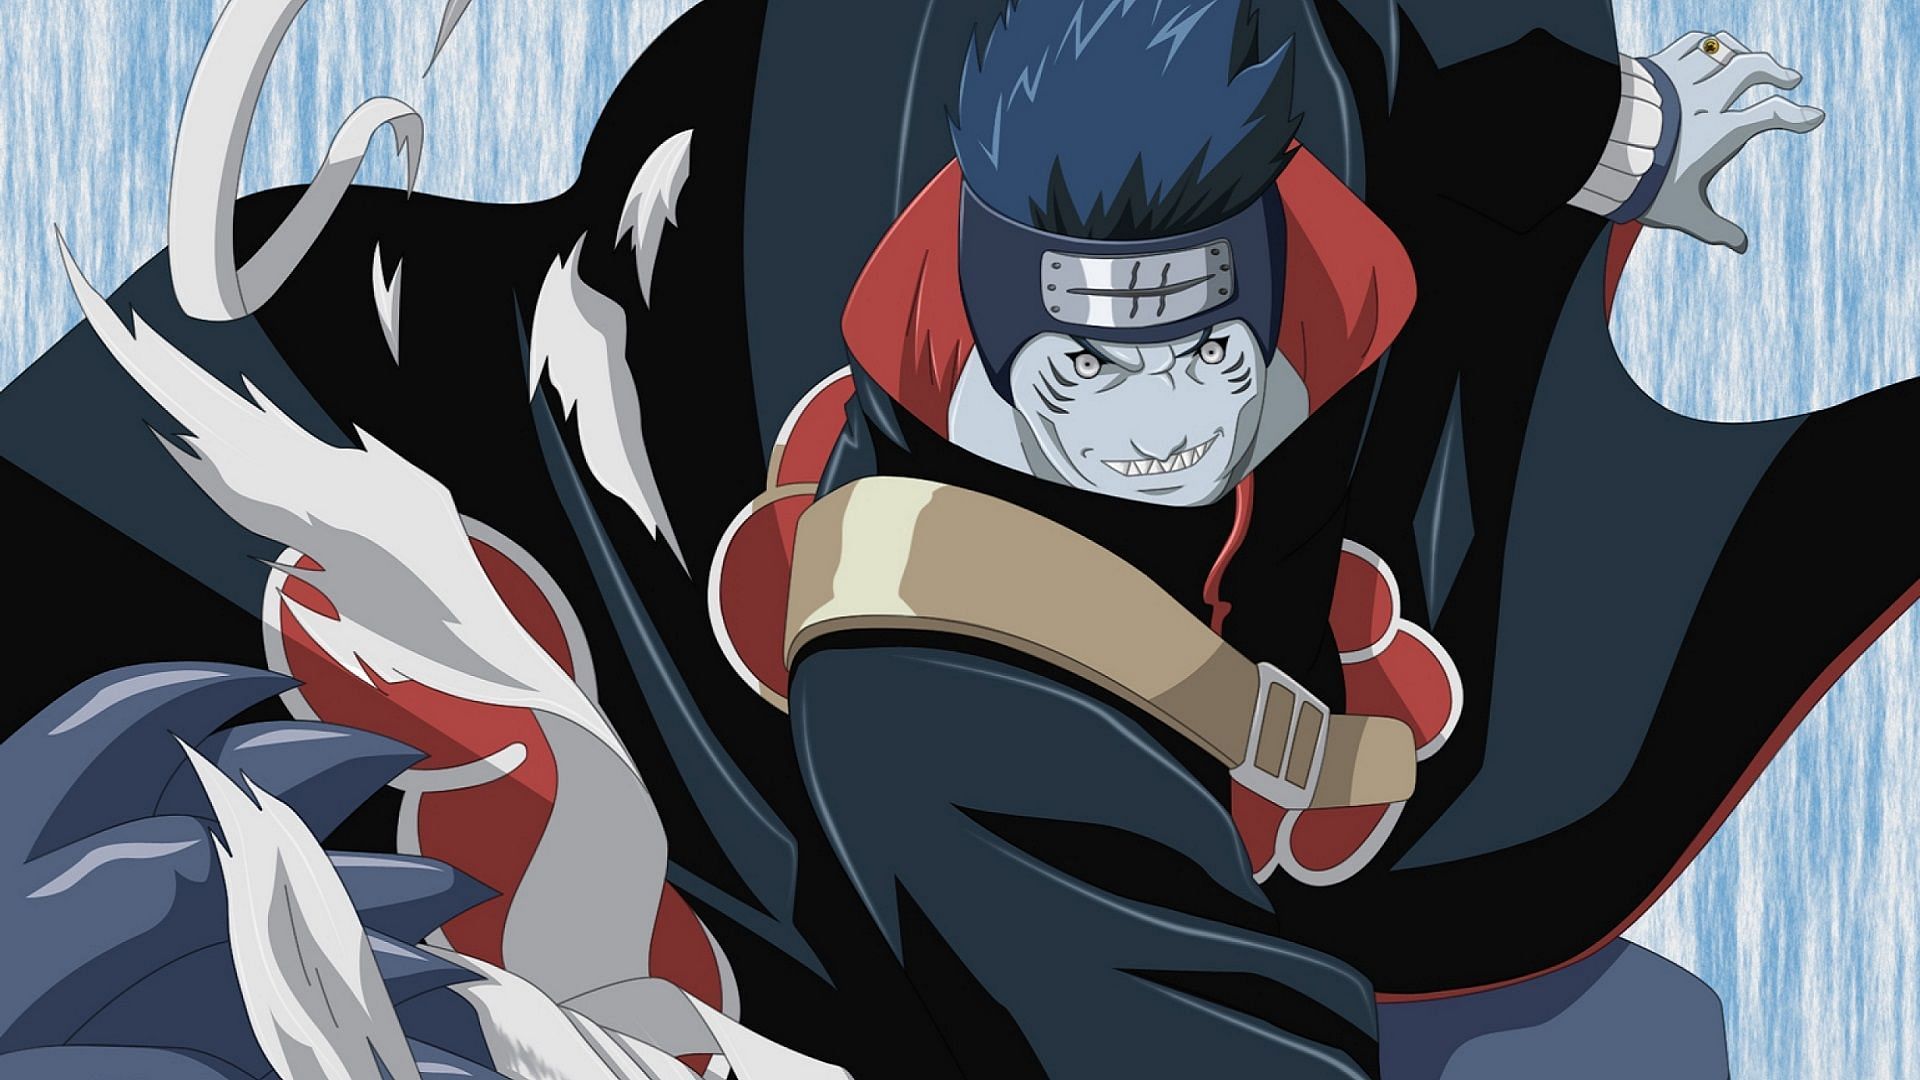 Who is stronger, the 7th gate guy or the reanimated Itachi? - Quora